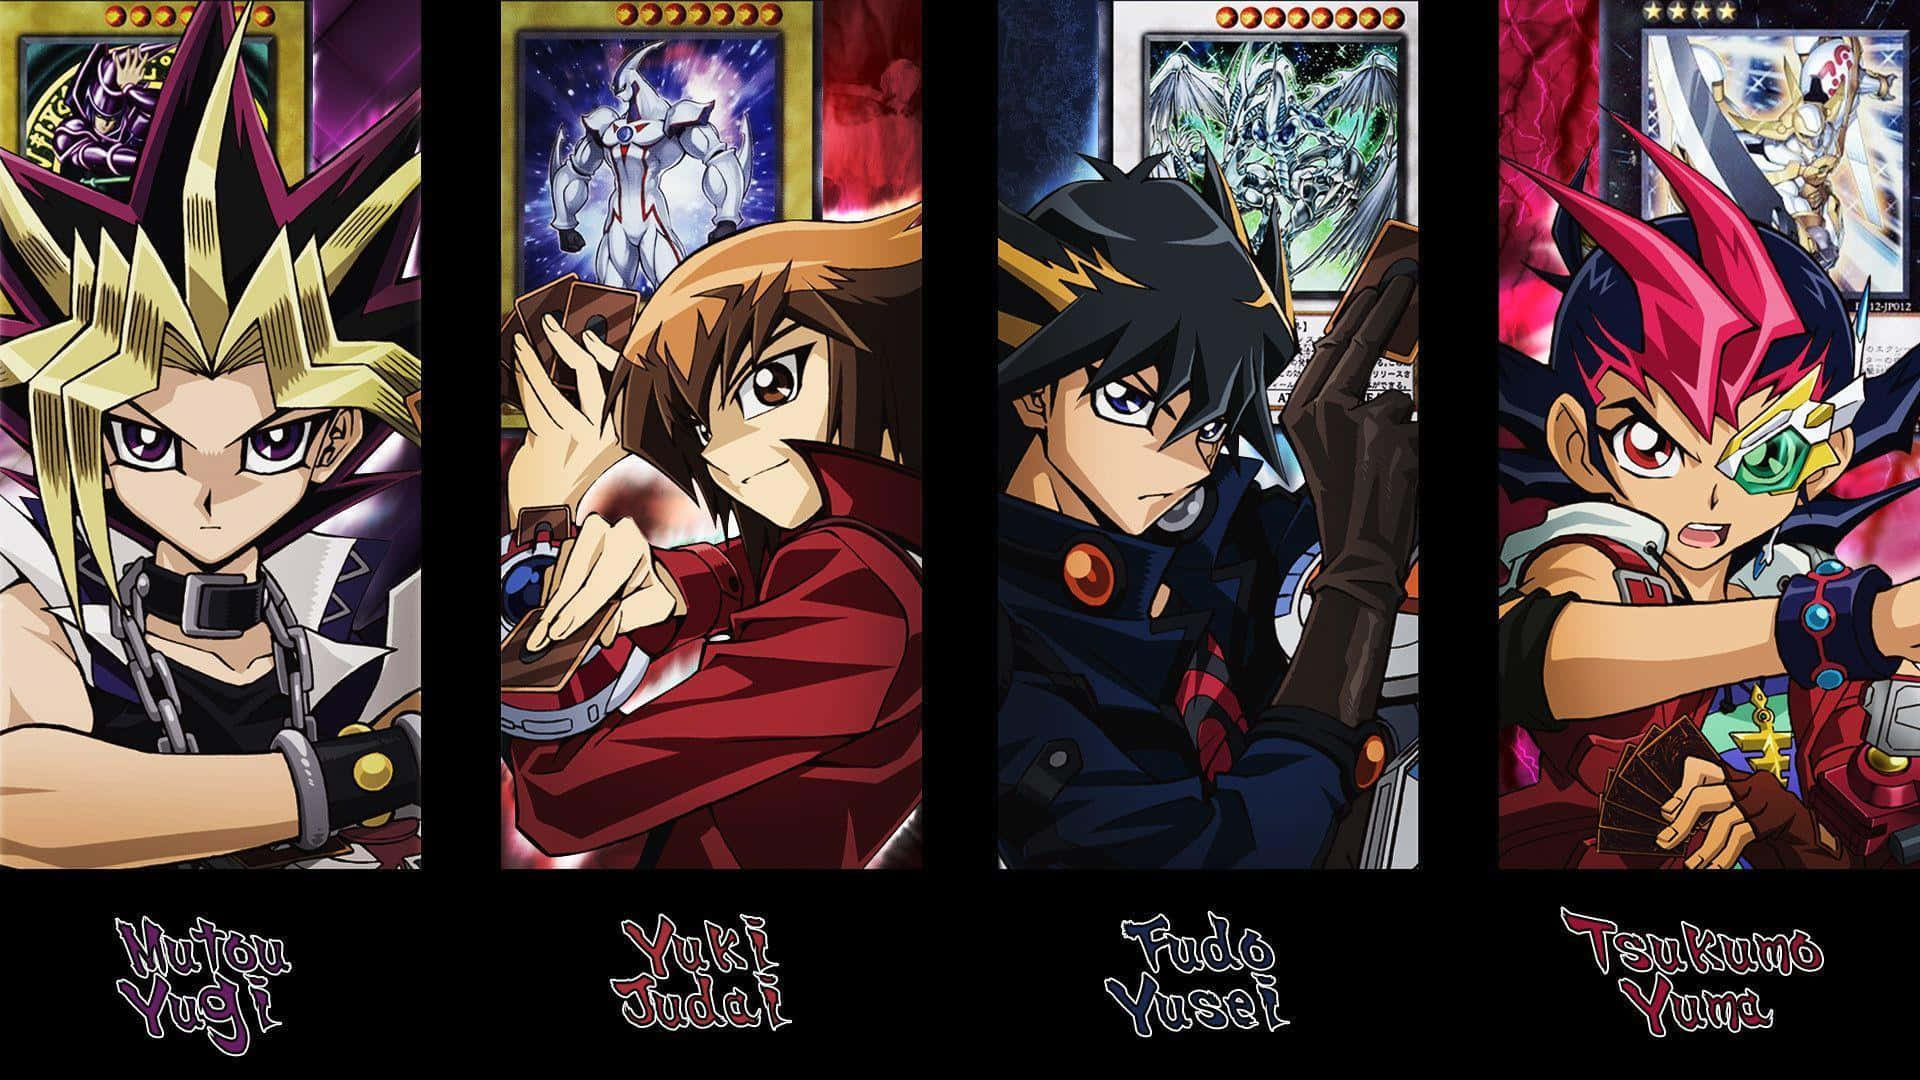 Duelists in the making.